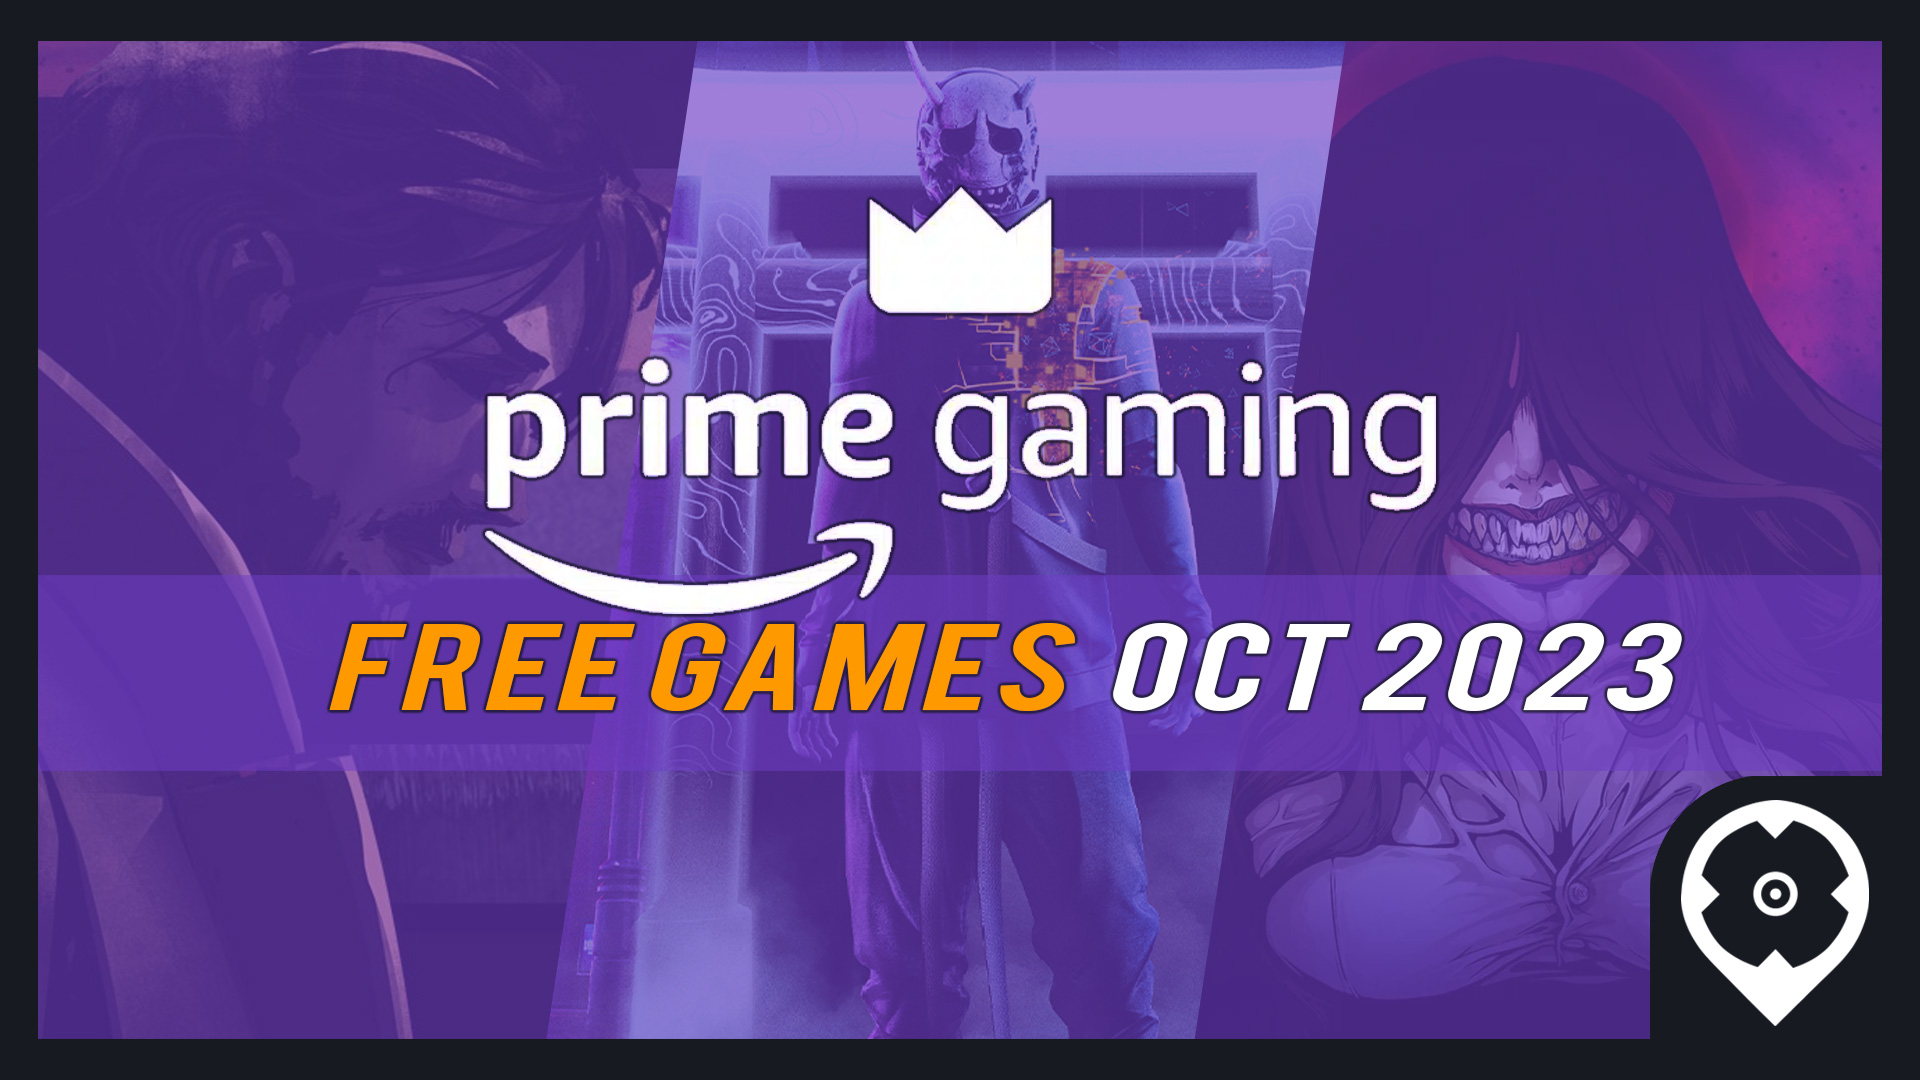 Prime Gaming: Ghostwire: Tokyo, GRUNND, Dead by Daylight, Diablo IV e mais